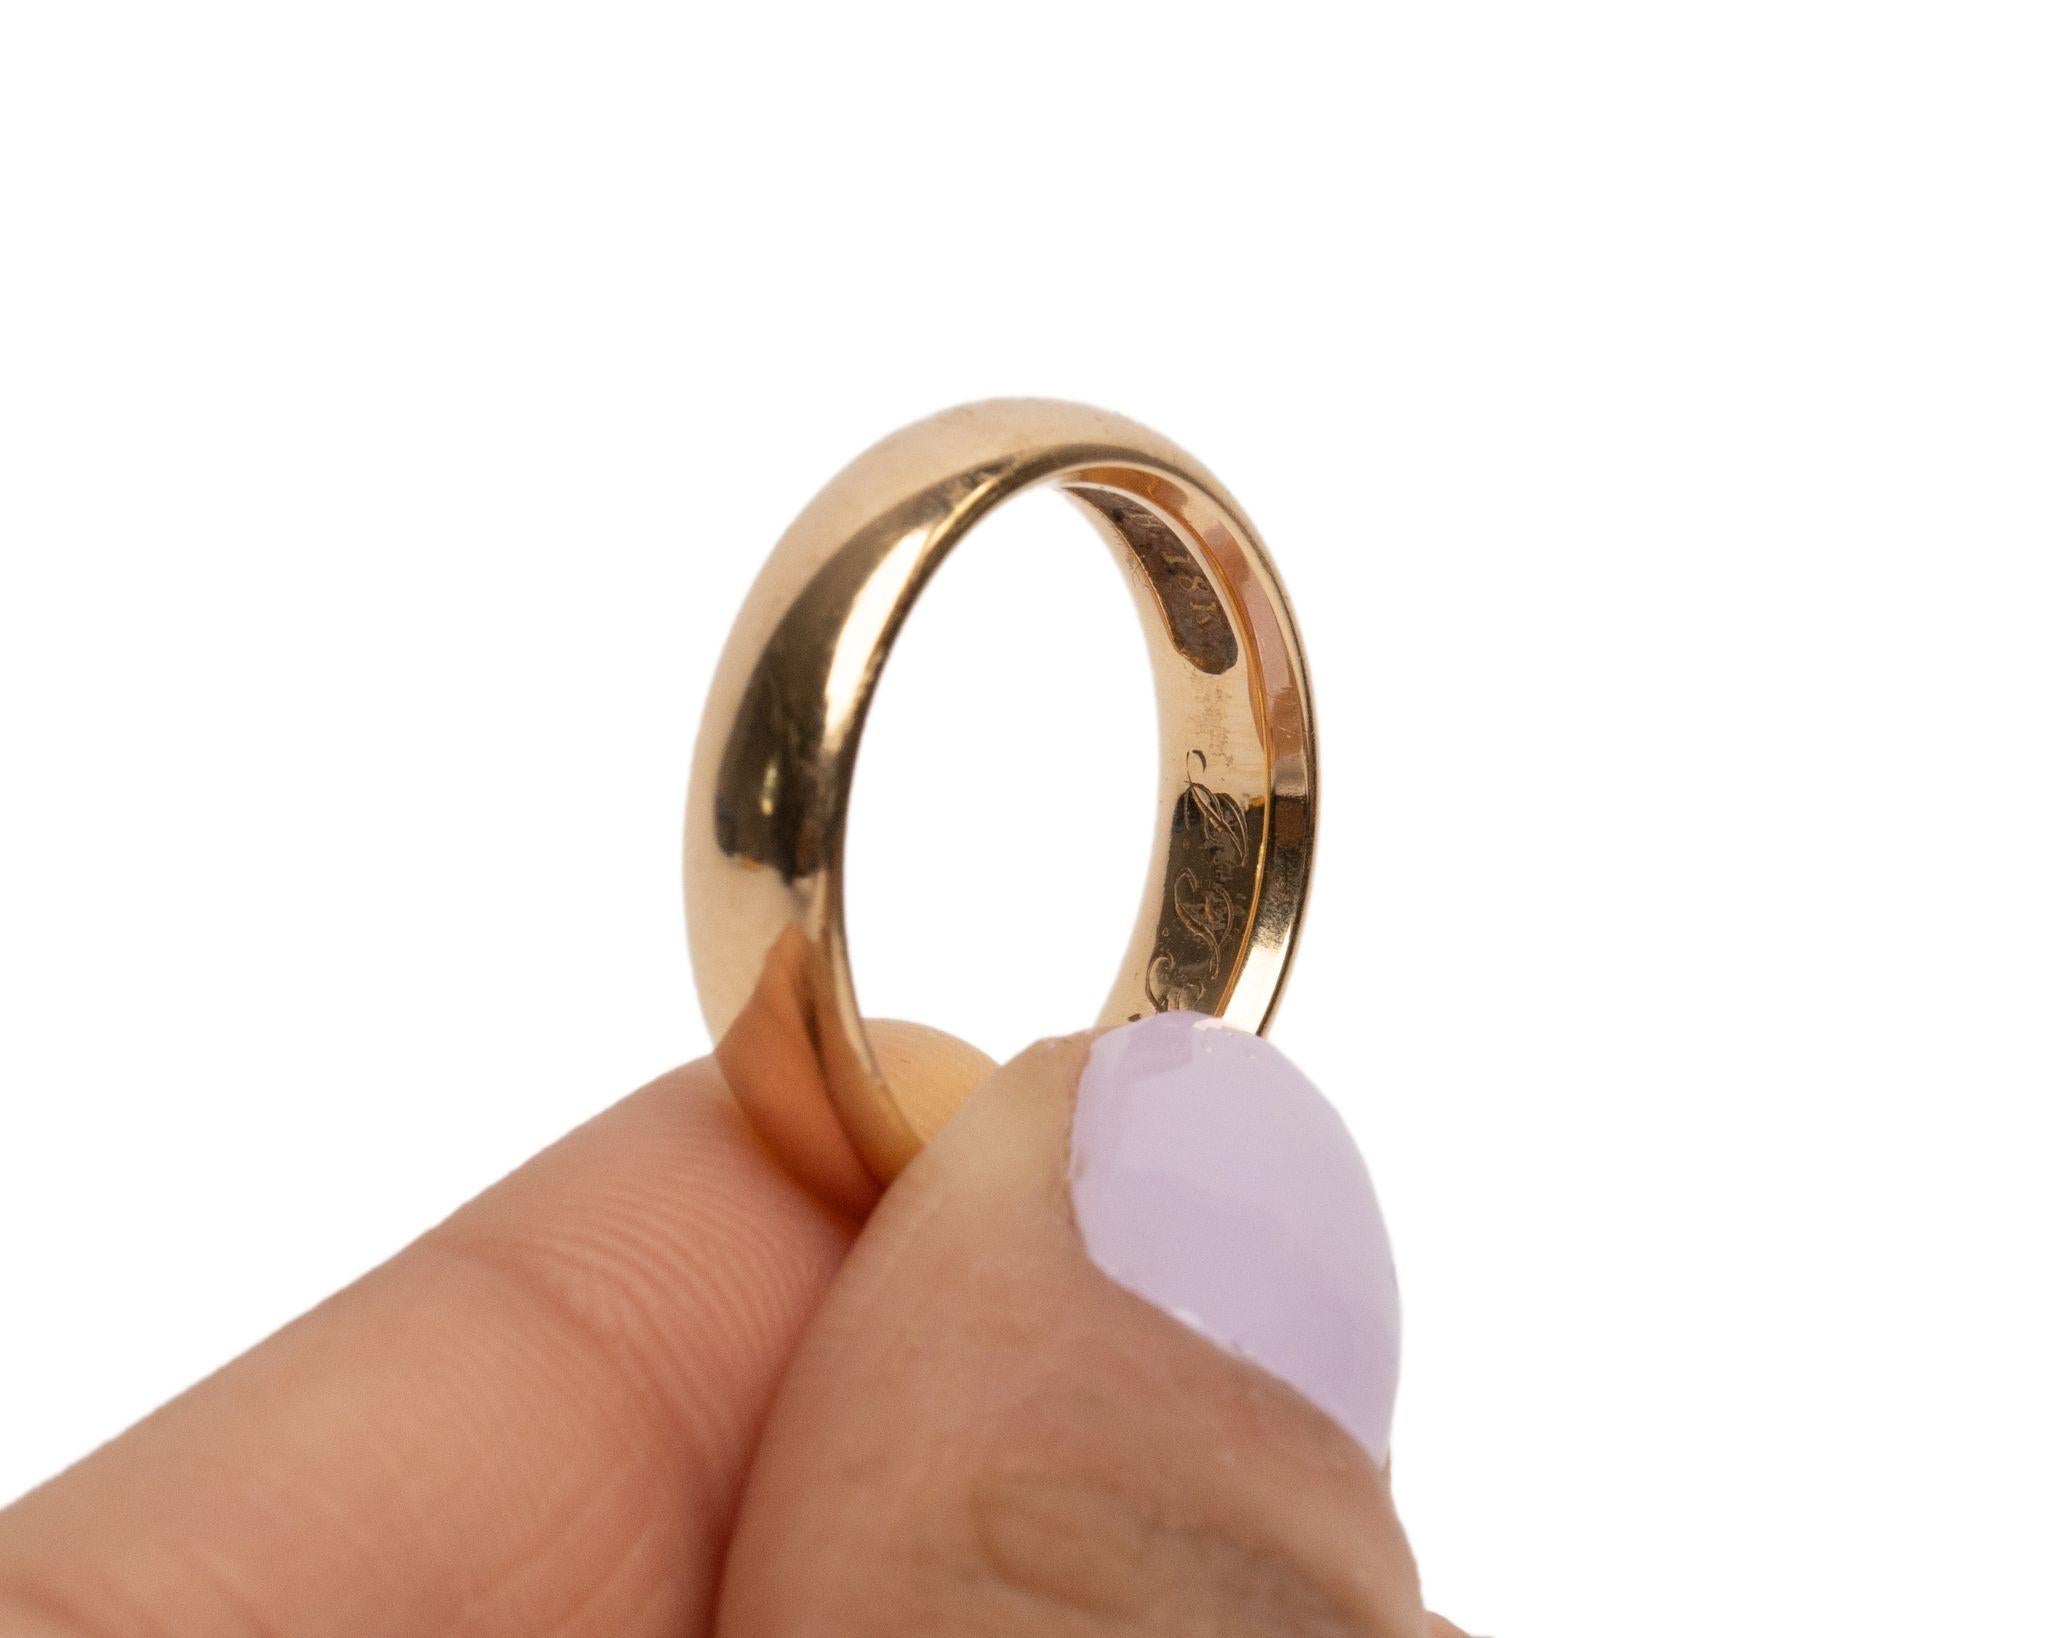 This beautiful unisex Edwardian band was made in America in 1911. This smooth 18K yellow gold antique band is a classic with engraving on the inside telling a sweet story of the past,  an eye catcher for the hopeless romantic. This piece of history